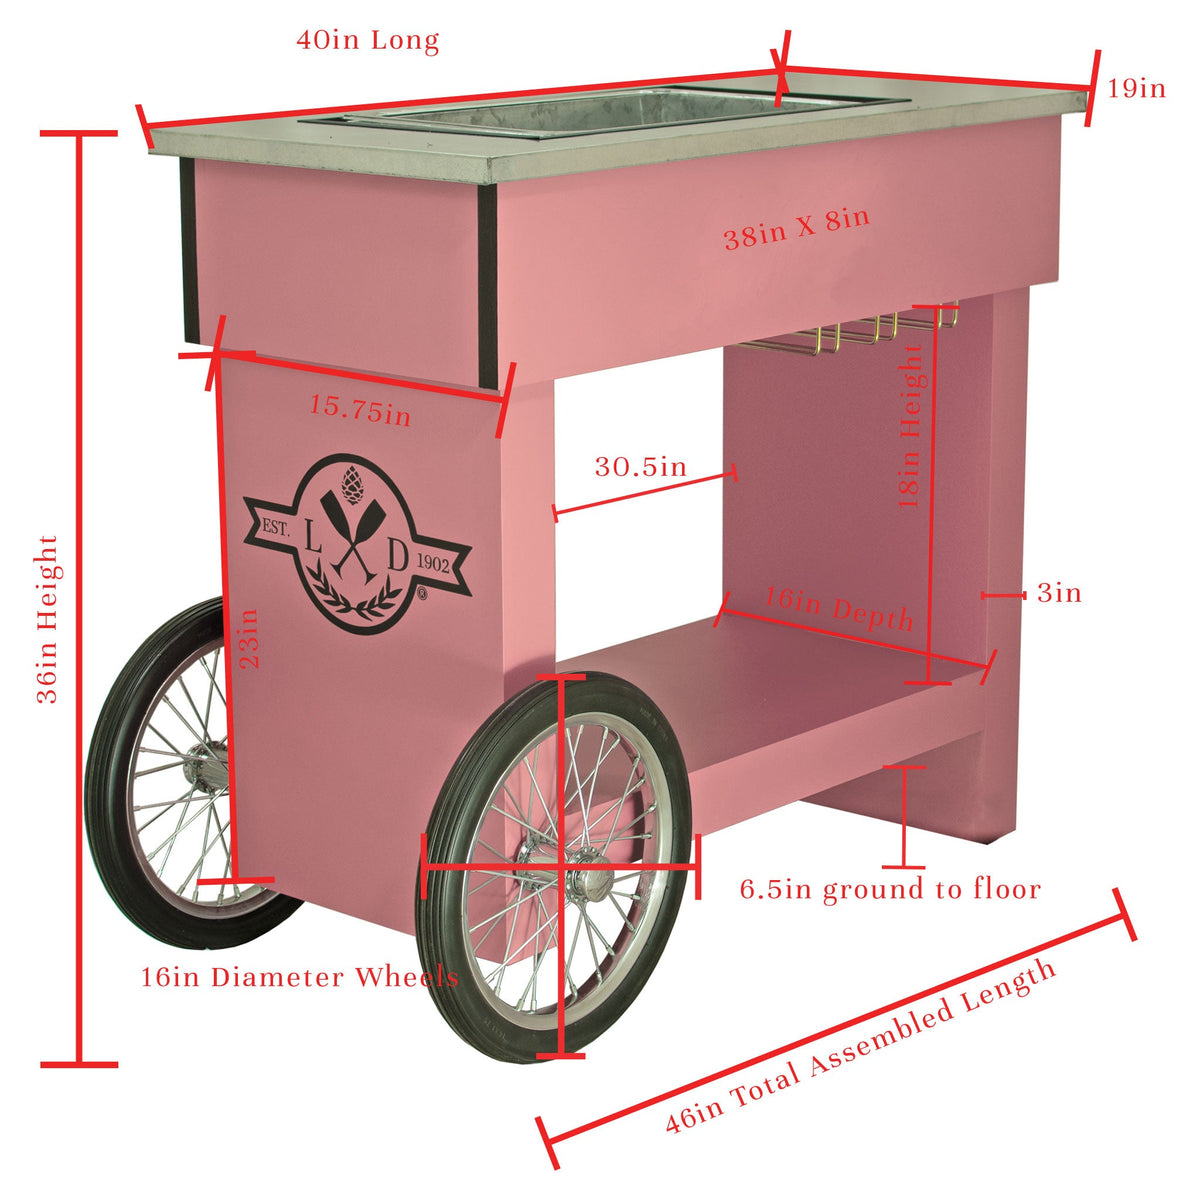 Dimensions and Specs of Lee Display's Champagne and Wine Bar Cart with Wheels in Pink Color